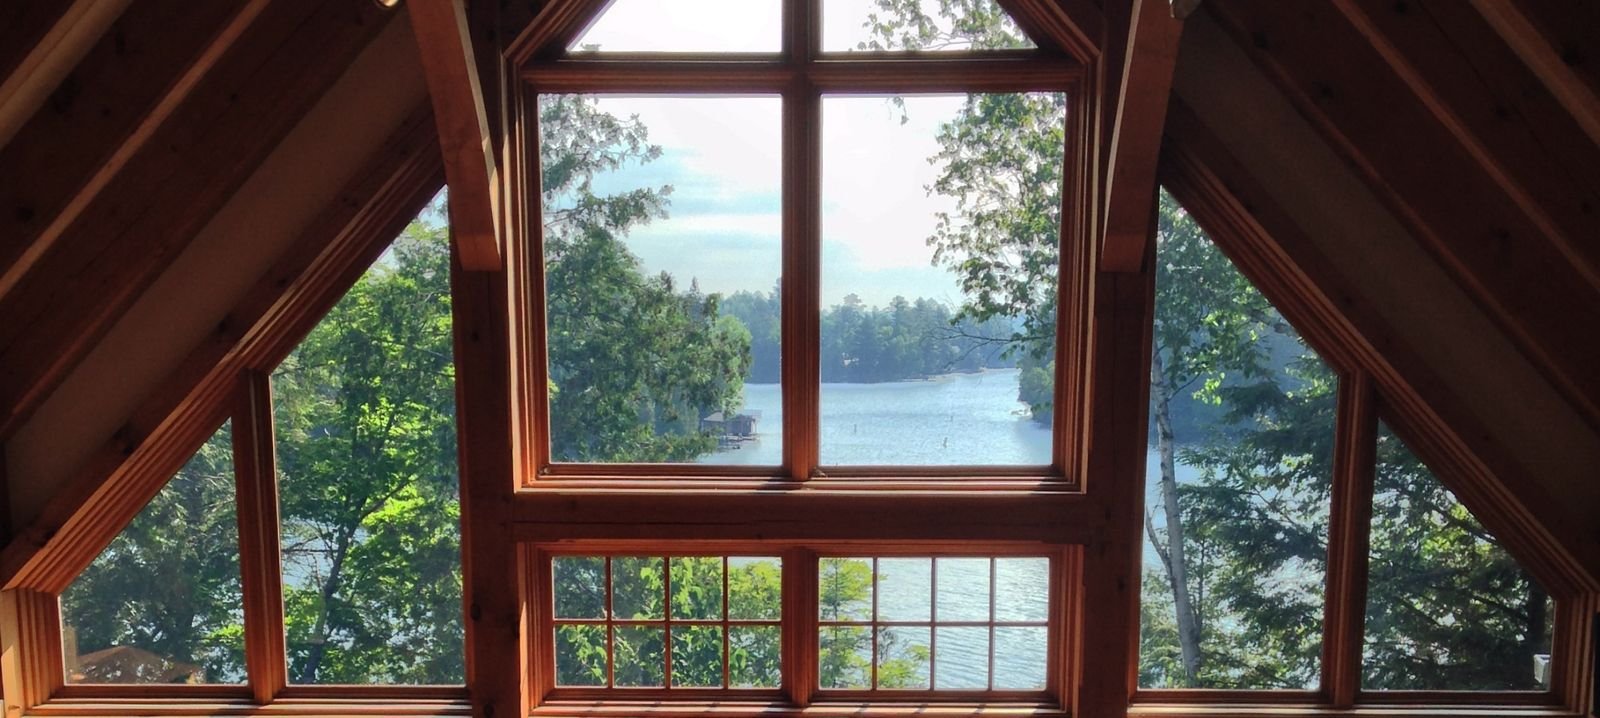 muskoka cottage vaulted ceiling looking out windows to lake